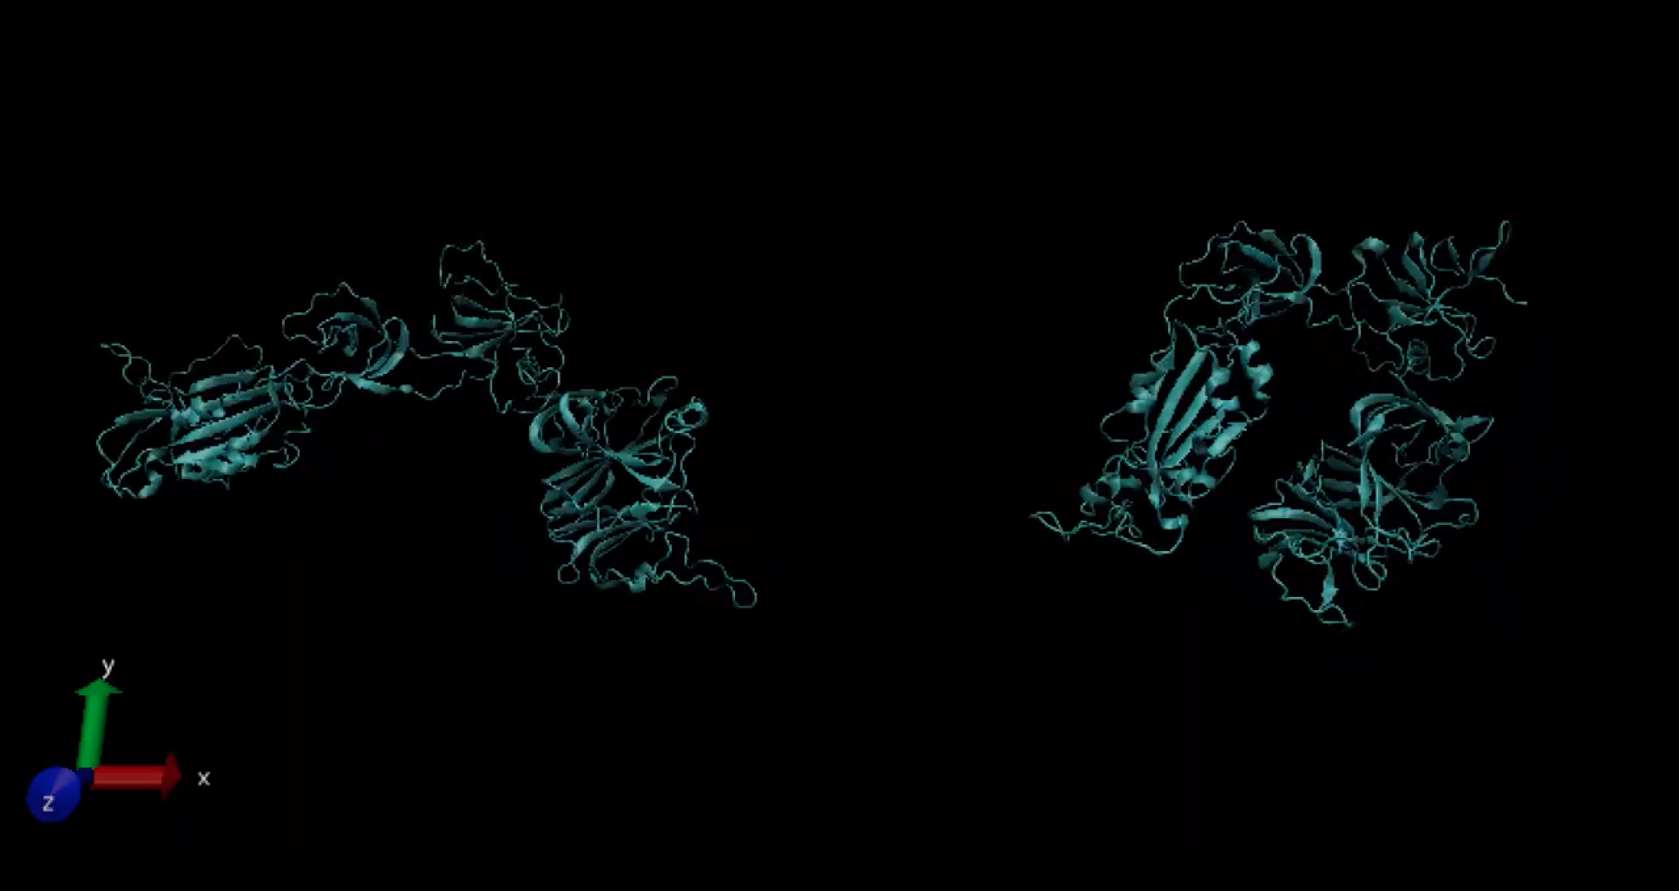 Two computer illustrations showing the receptor binding domain of the spike protein of SARS-Cov-2 with blue wavy ribbons and lines on a black background with the x, y and z axes.